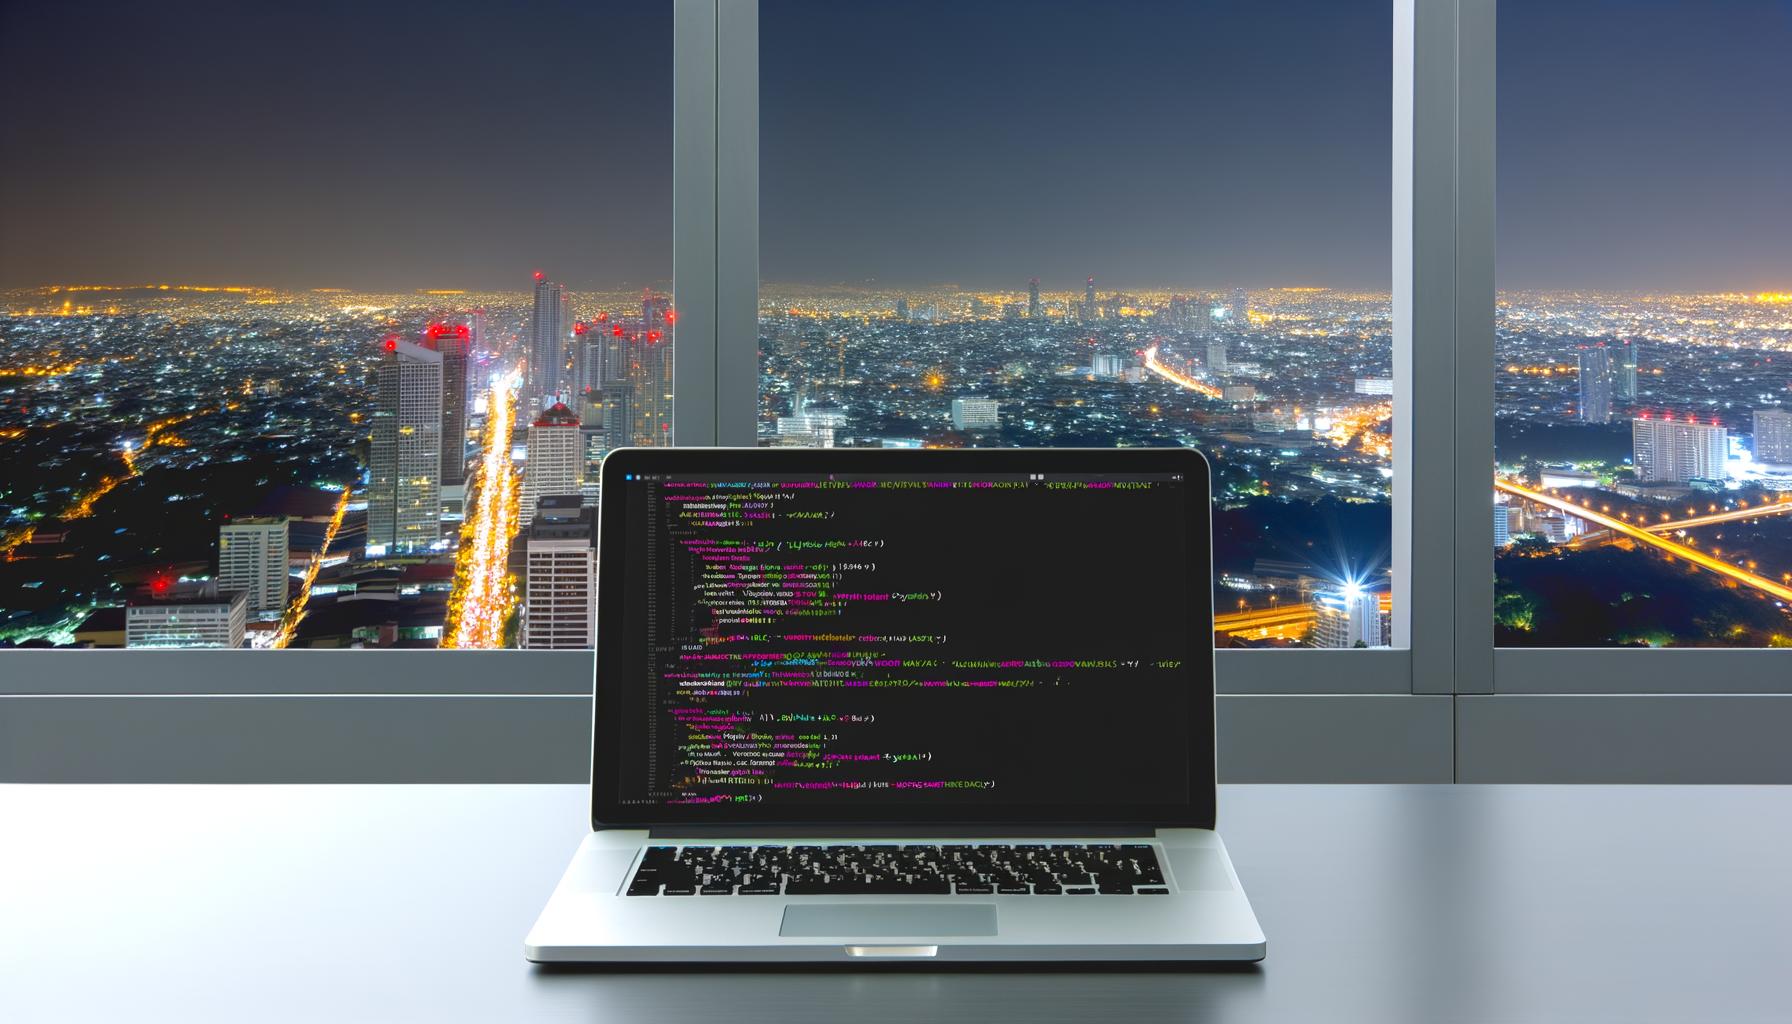 A laptop with HTML code on the screen, sitting in front of a window with a brightly lit city outside.